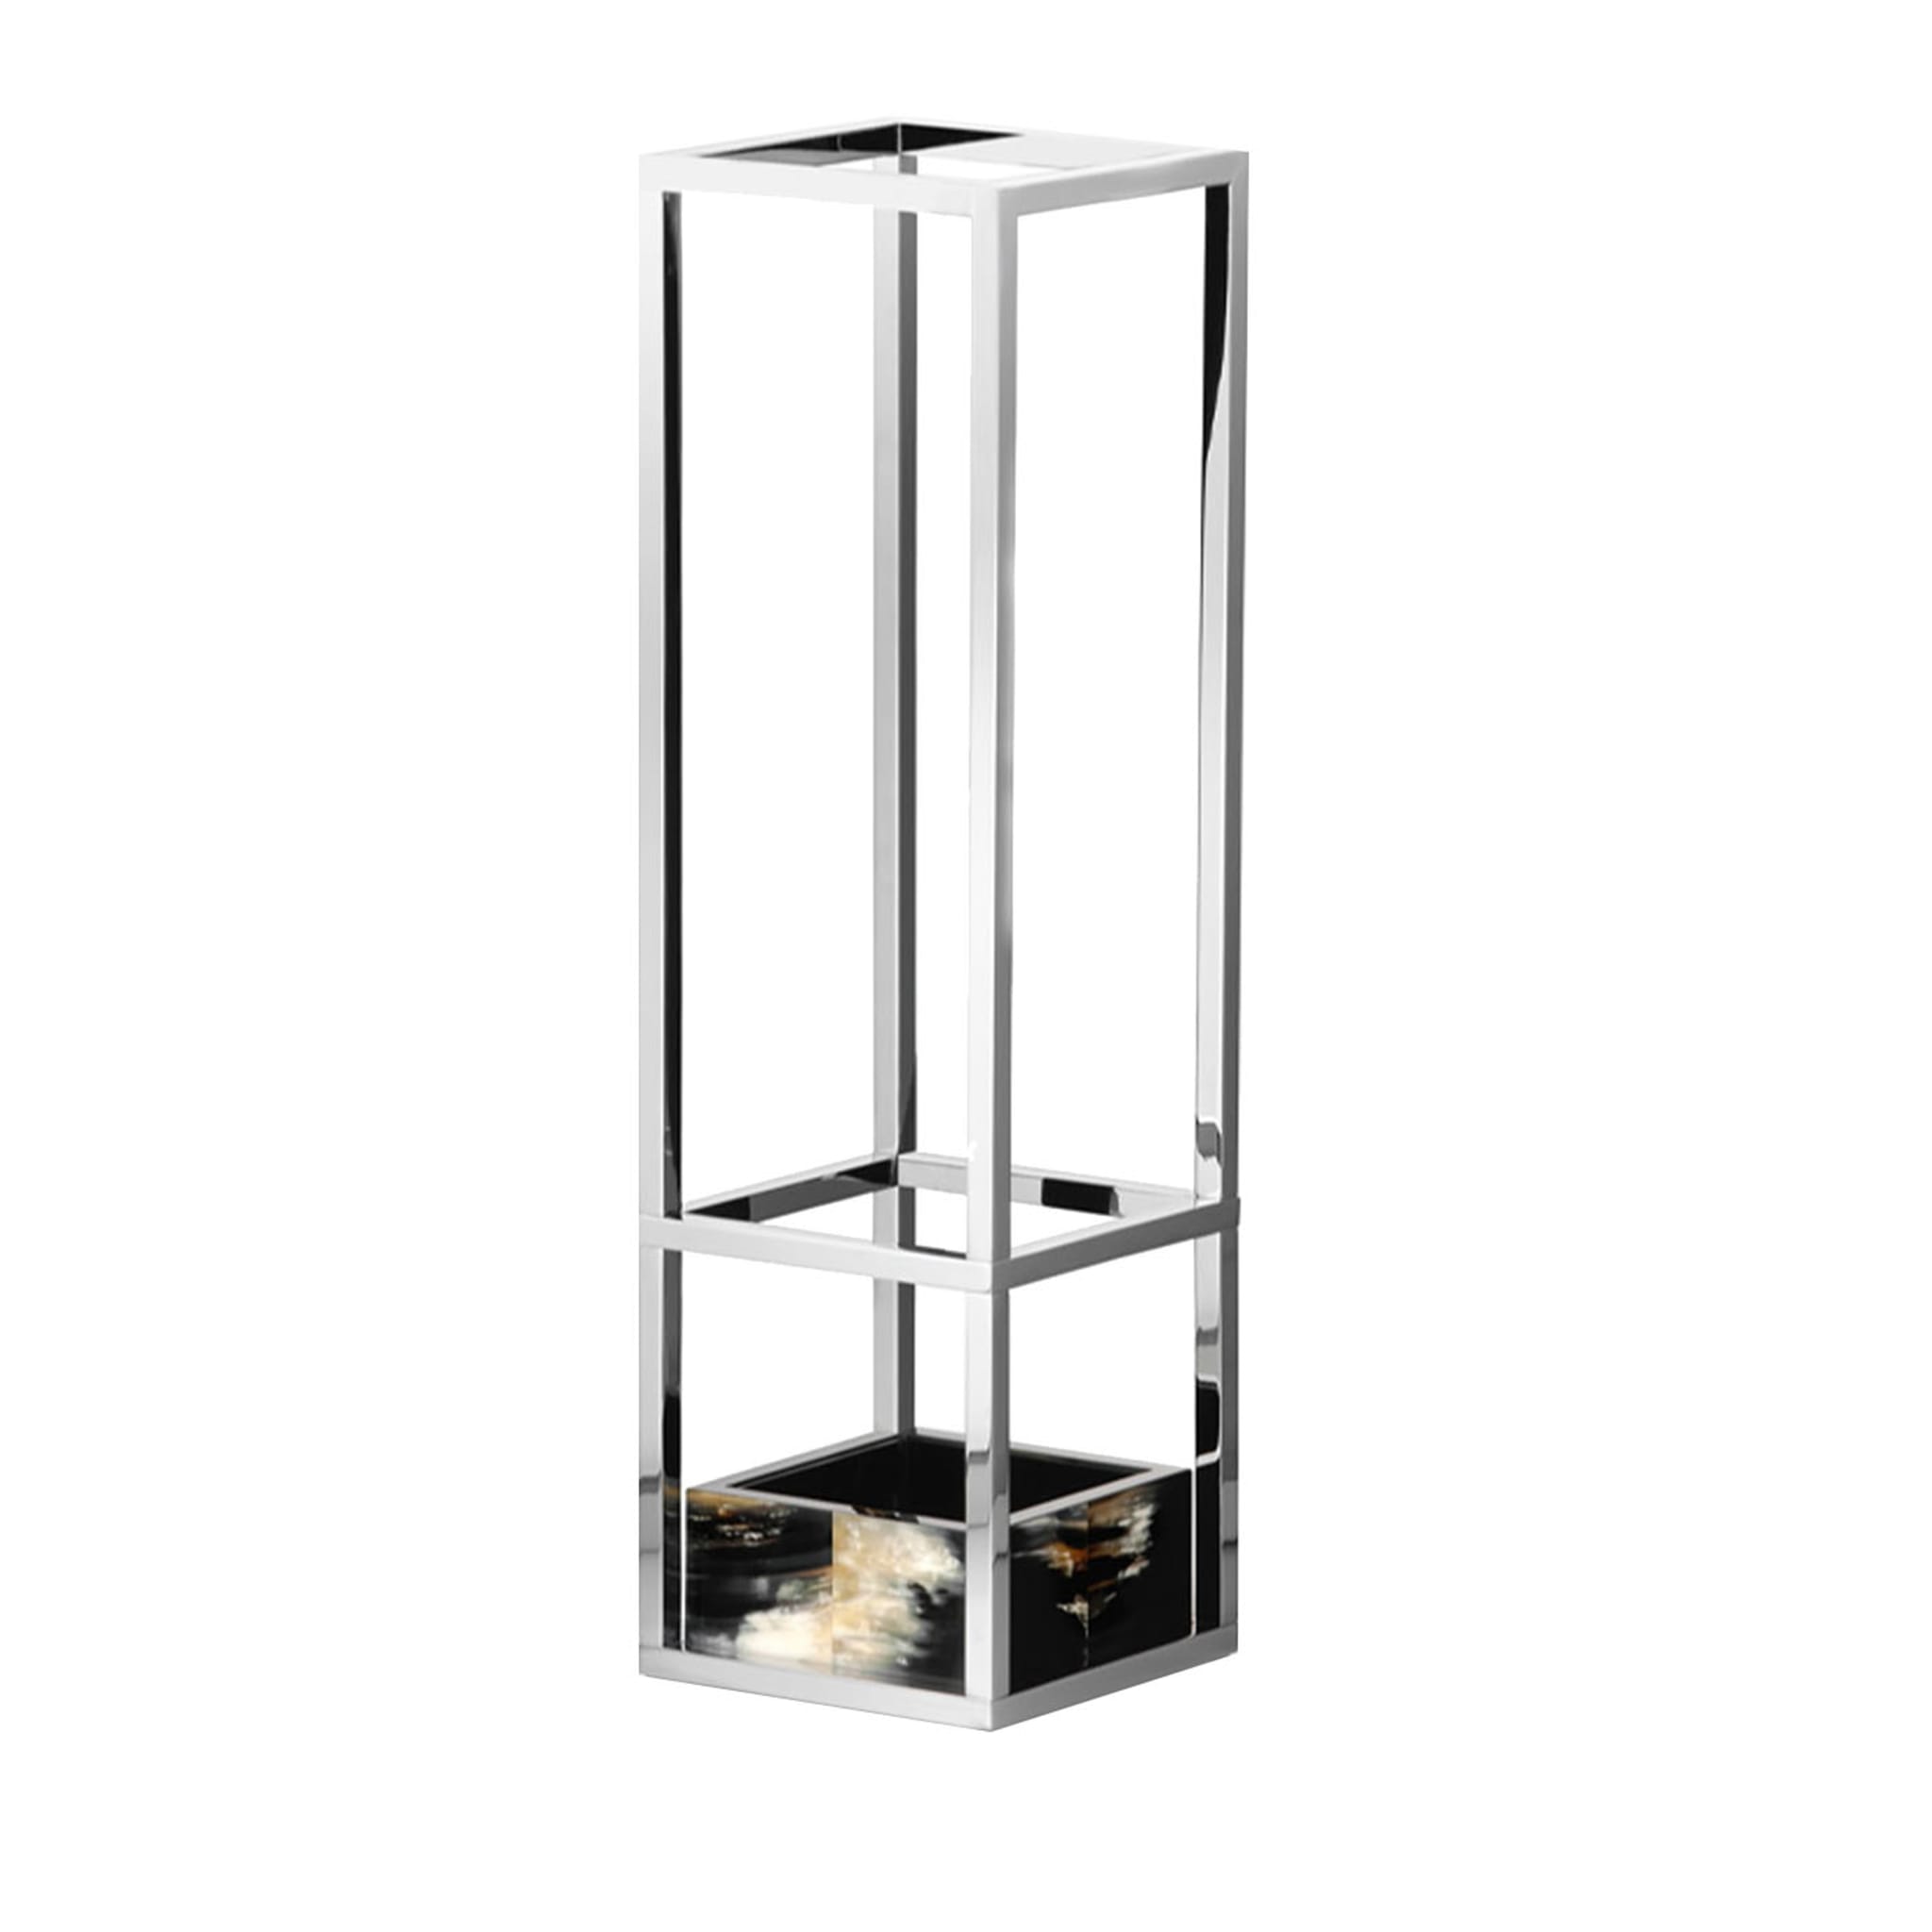 Pluvio Stainless Steel Umbrella Stand with Horn Inserts - Main view